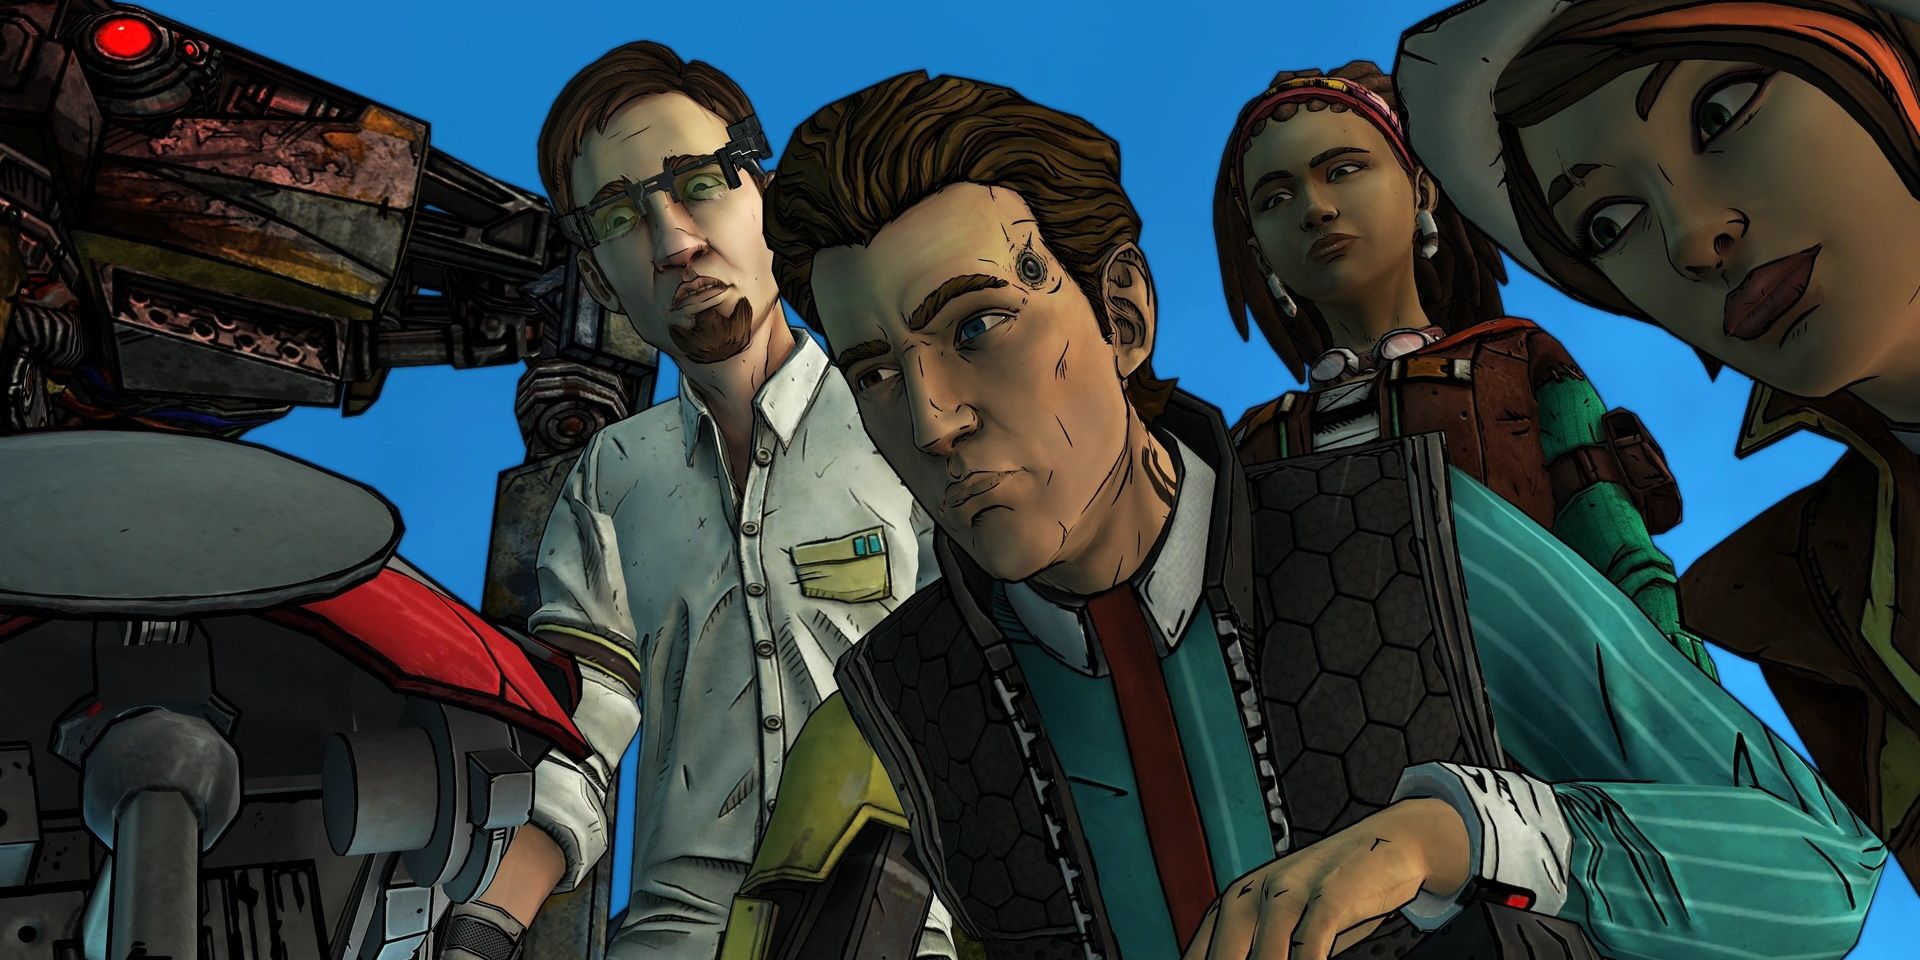 Cast of Tales from the Borderlands